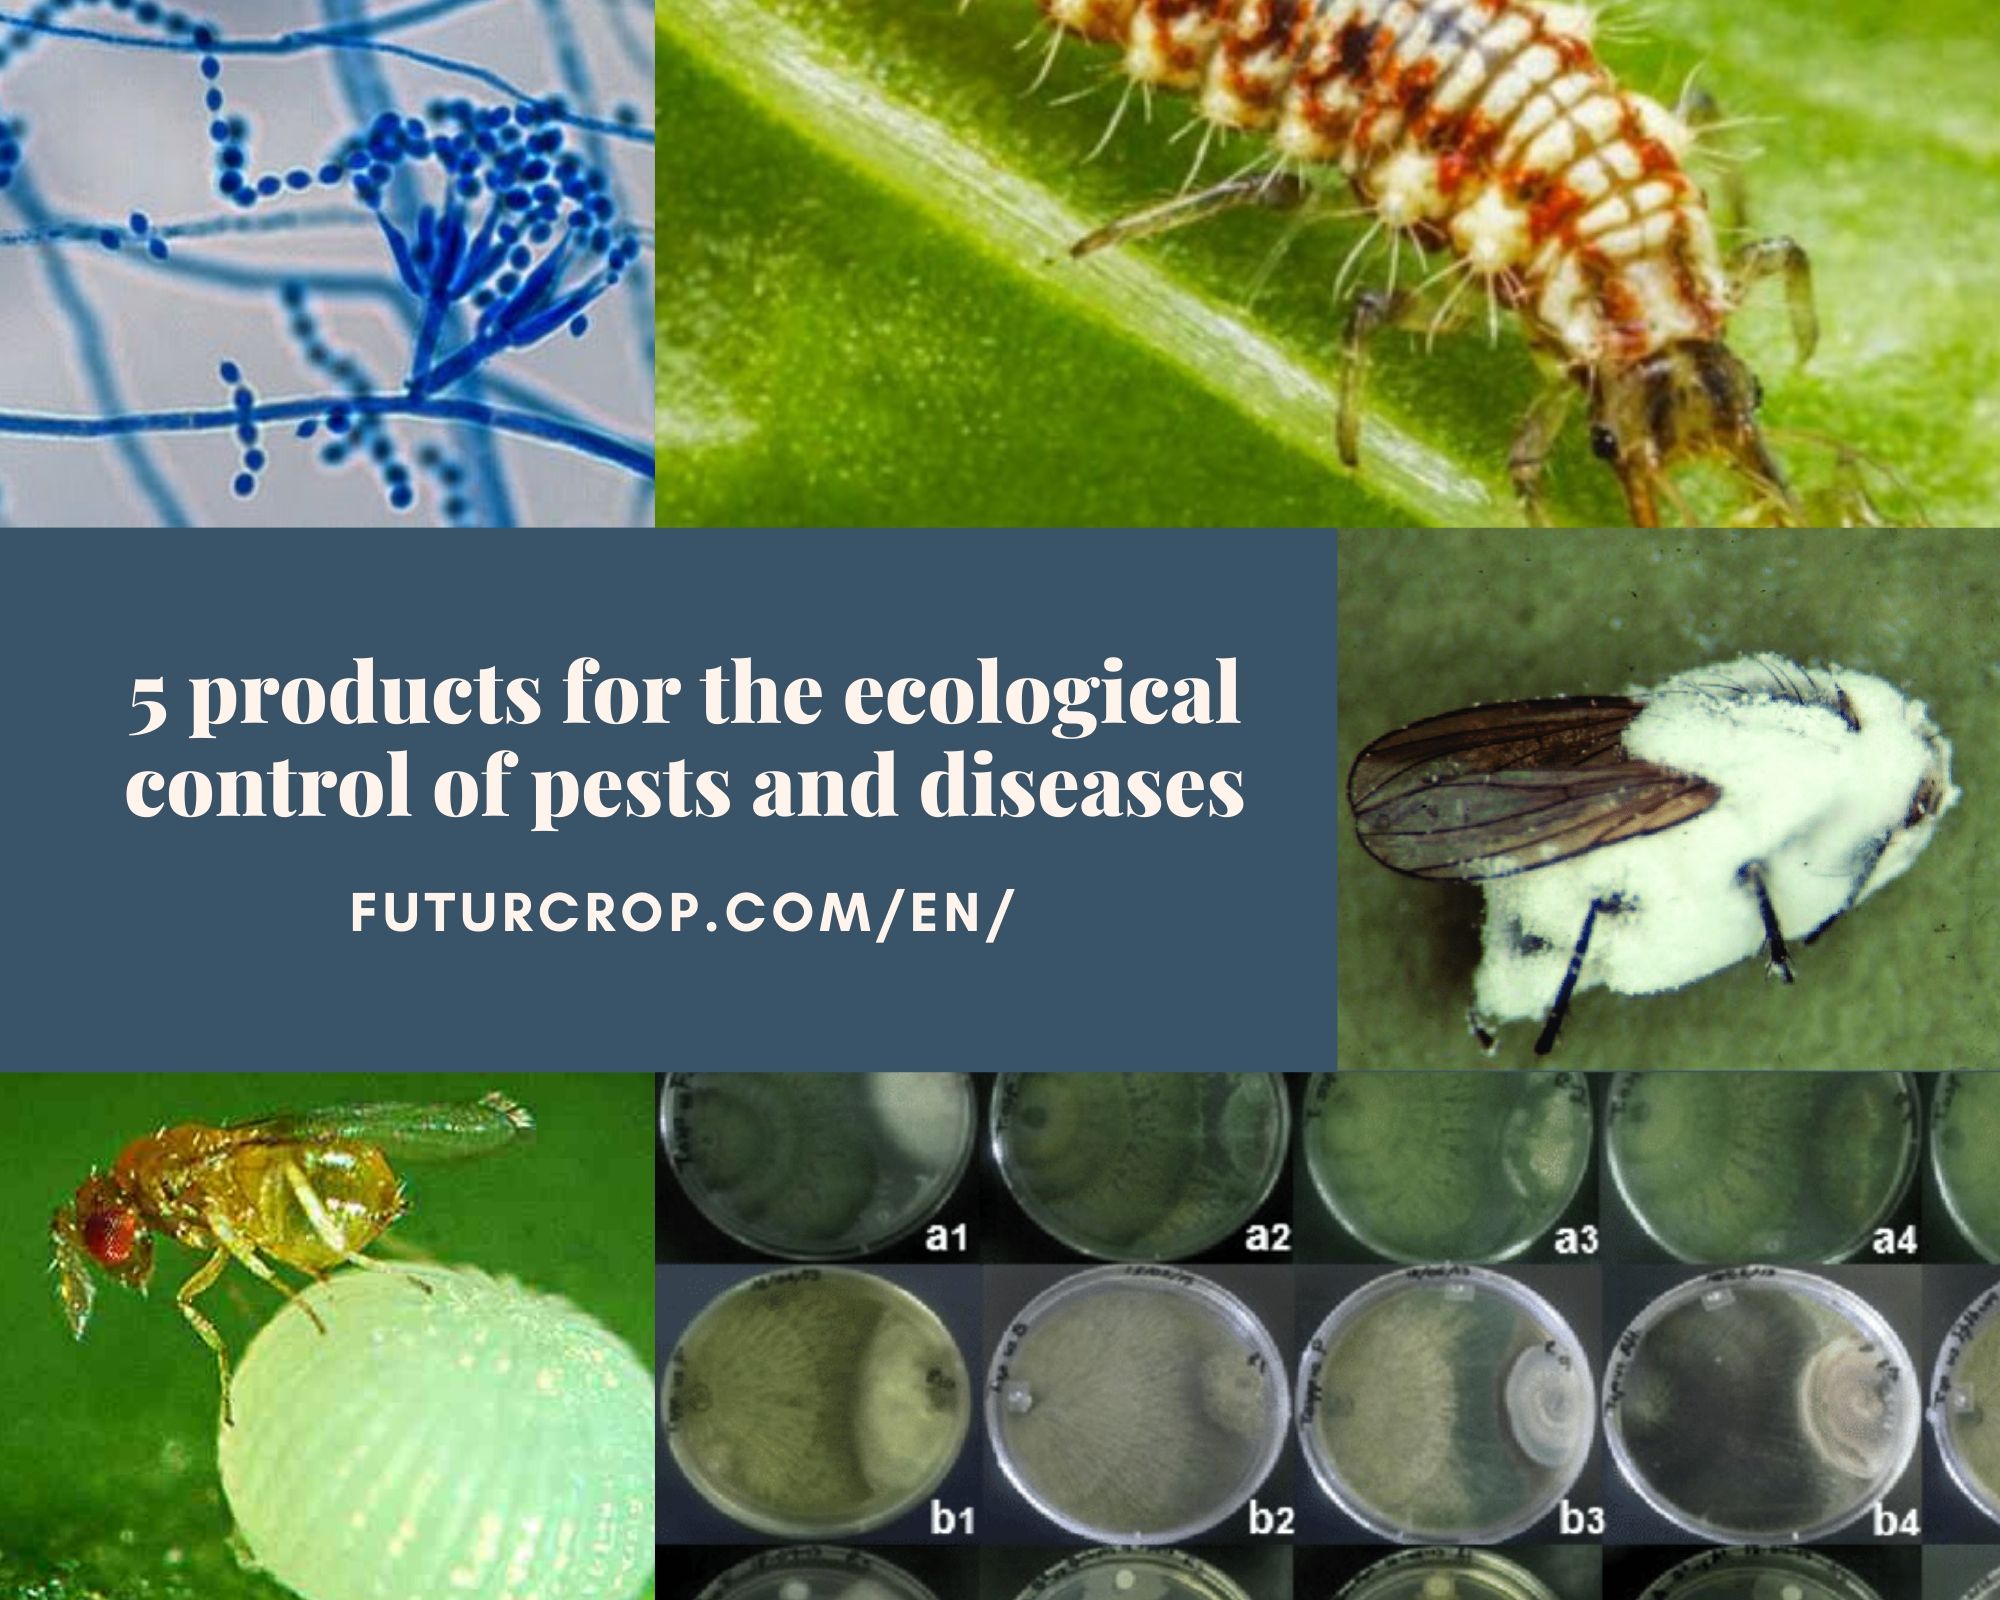 5 products for the ecological control of pests and diseases